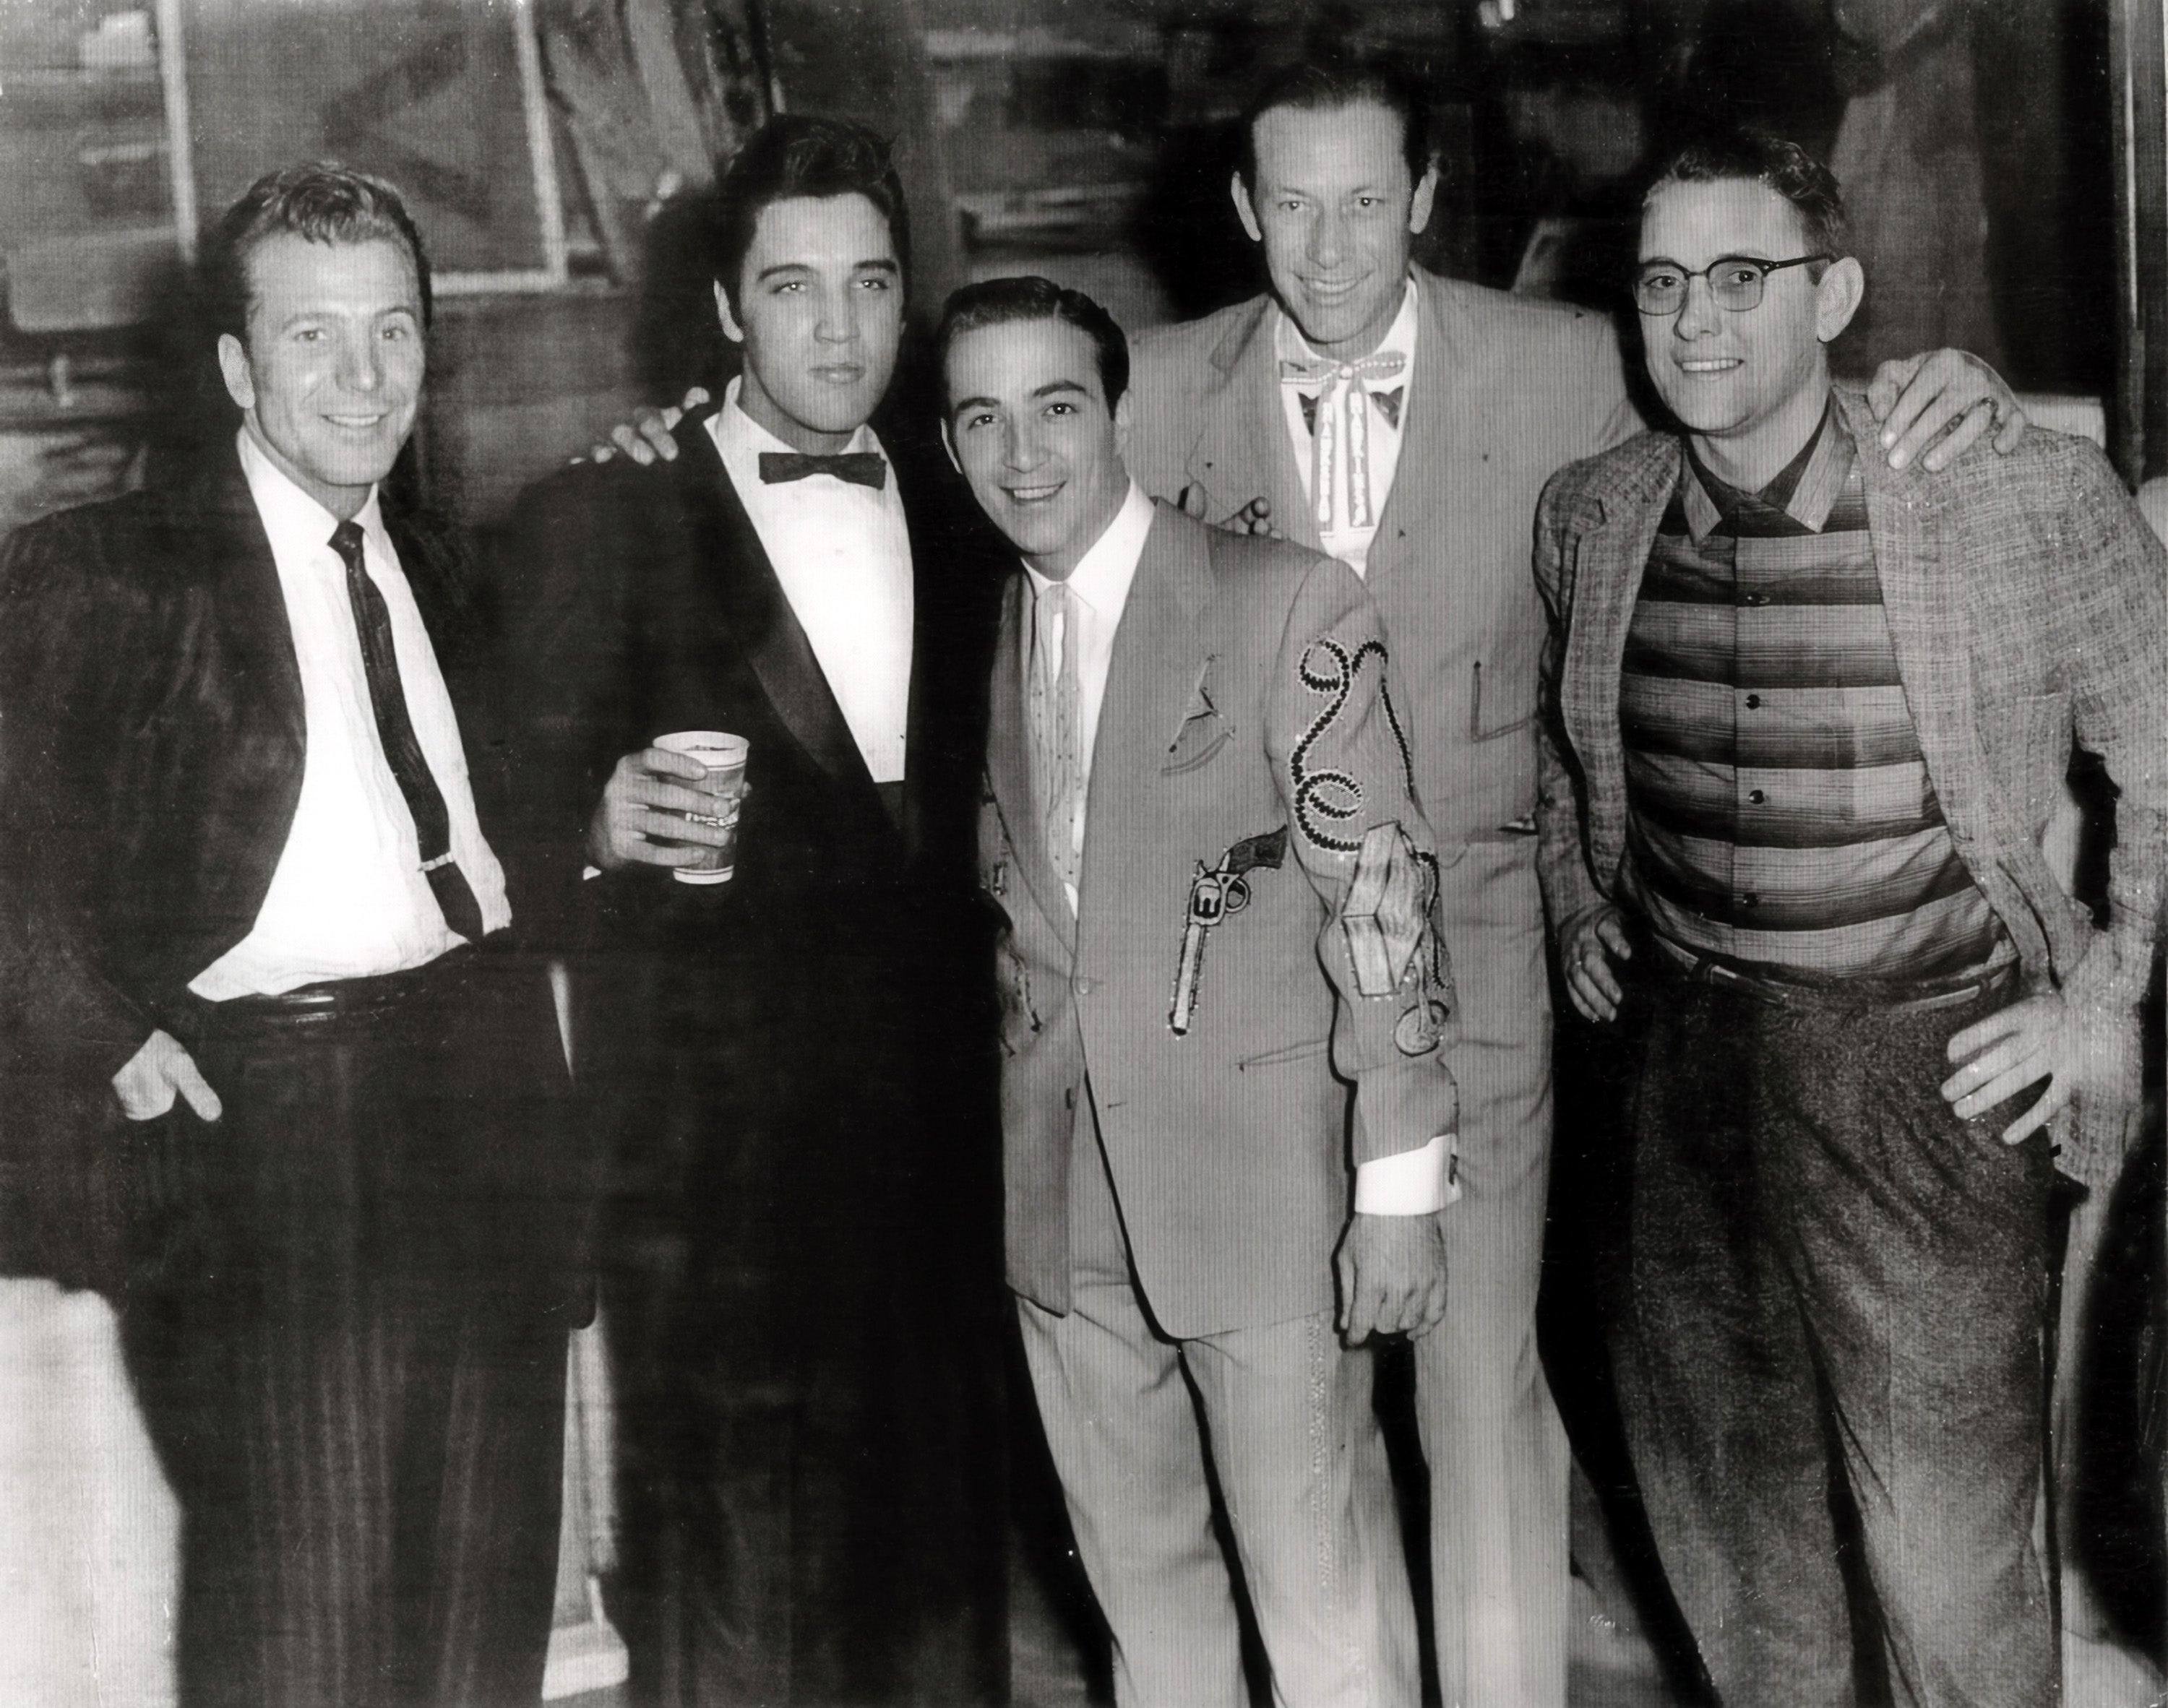 Photo of Elvis with friends backstage at the Ryman for the Grand Ole Opry